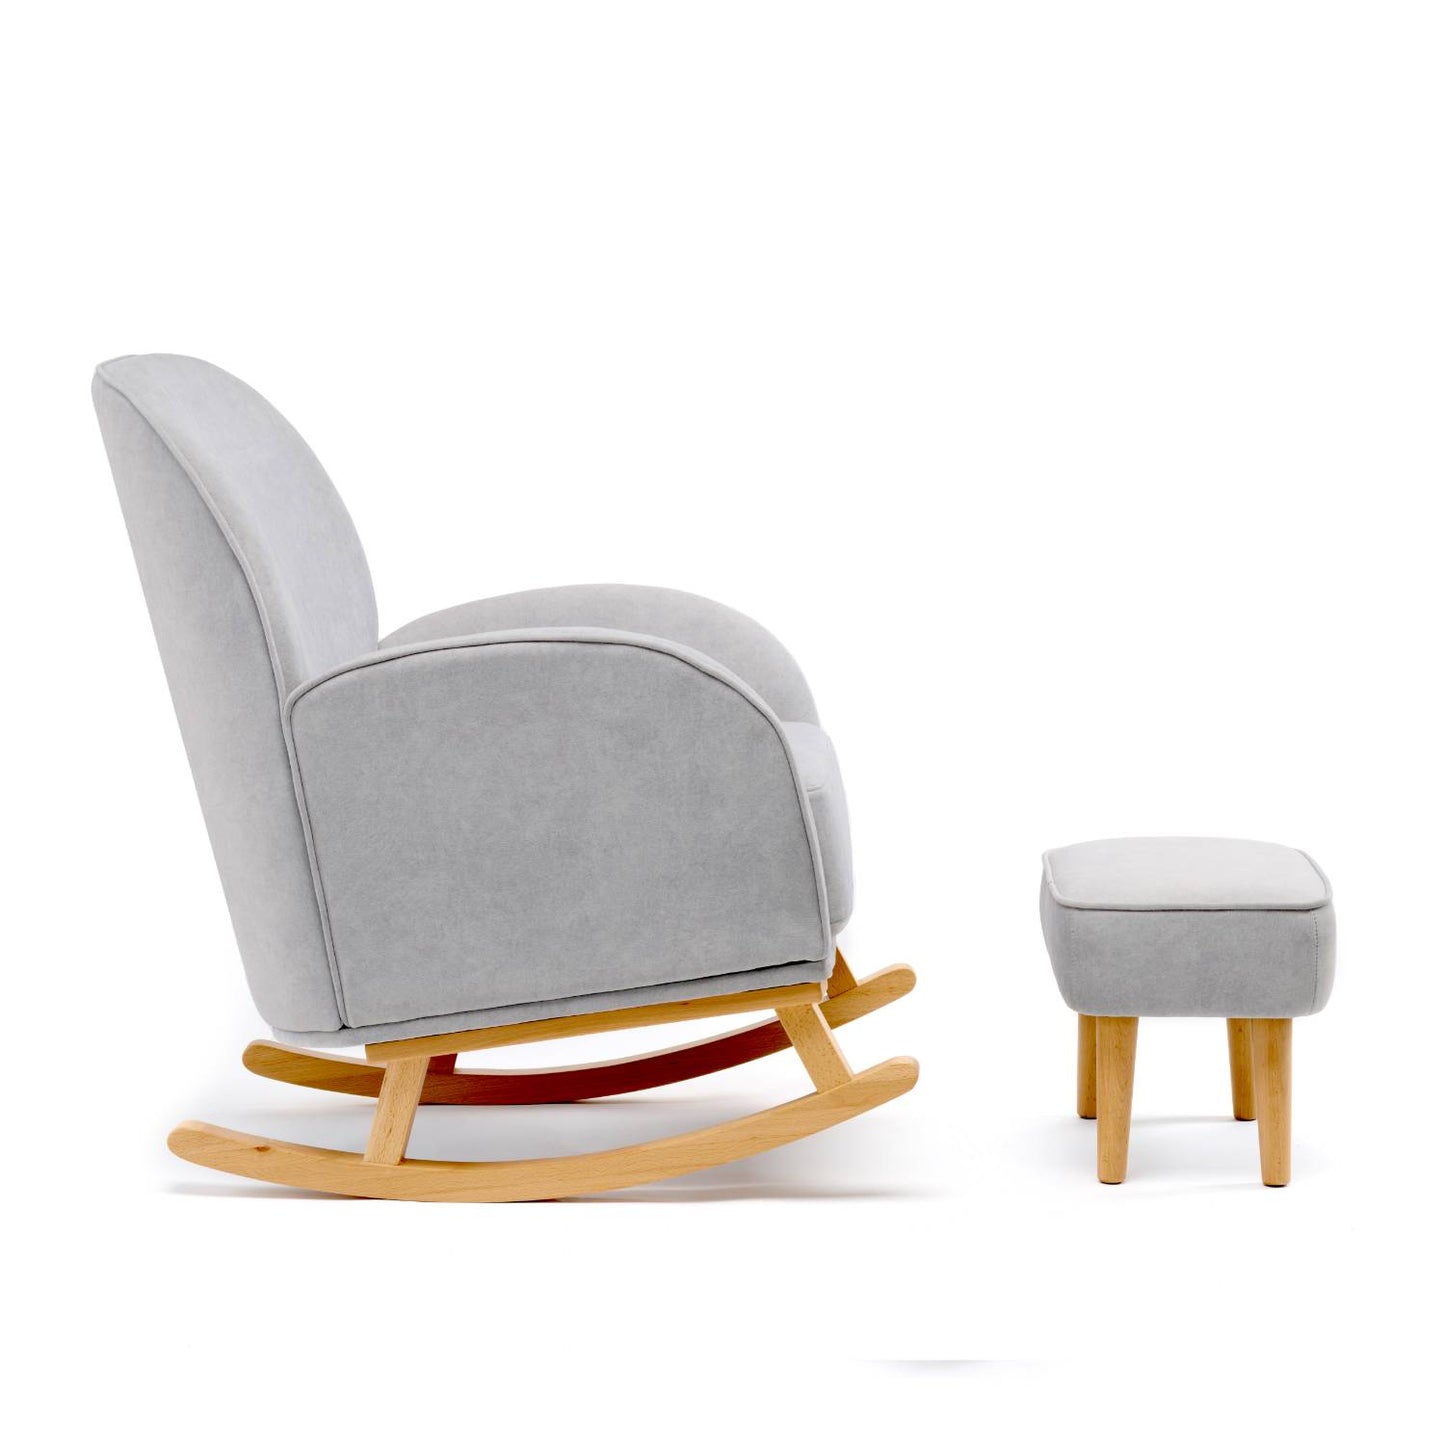 A side view shot of the Babymore Freya Nursing Rocking Chair with Stool Set in Grey colour showing its natural wood curved rocker legs.